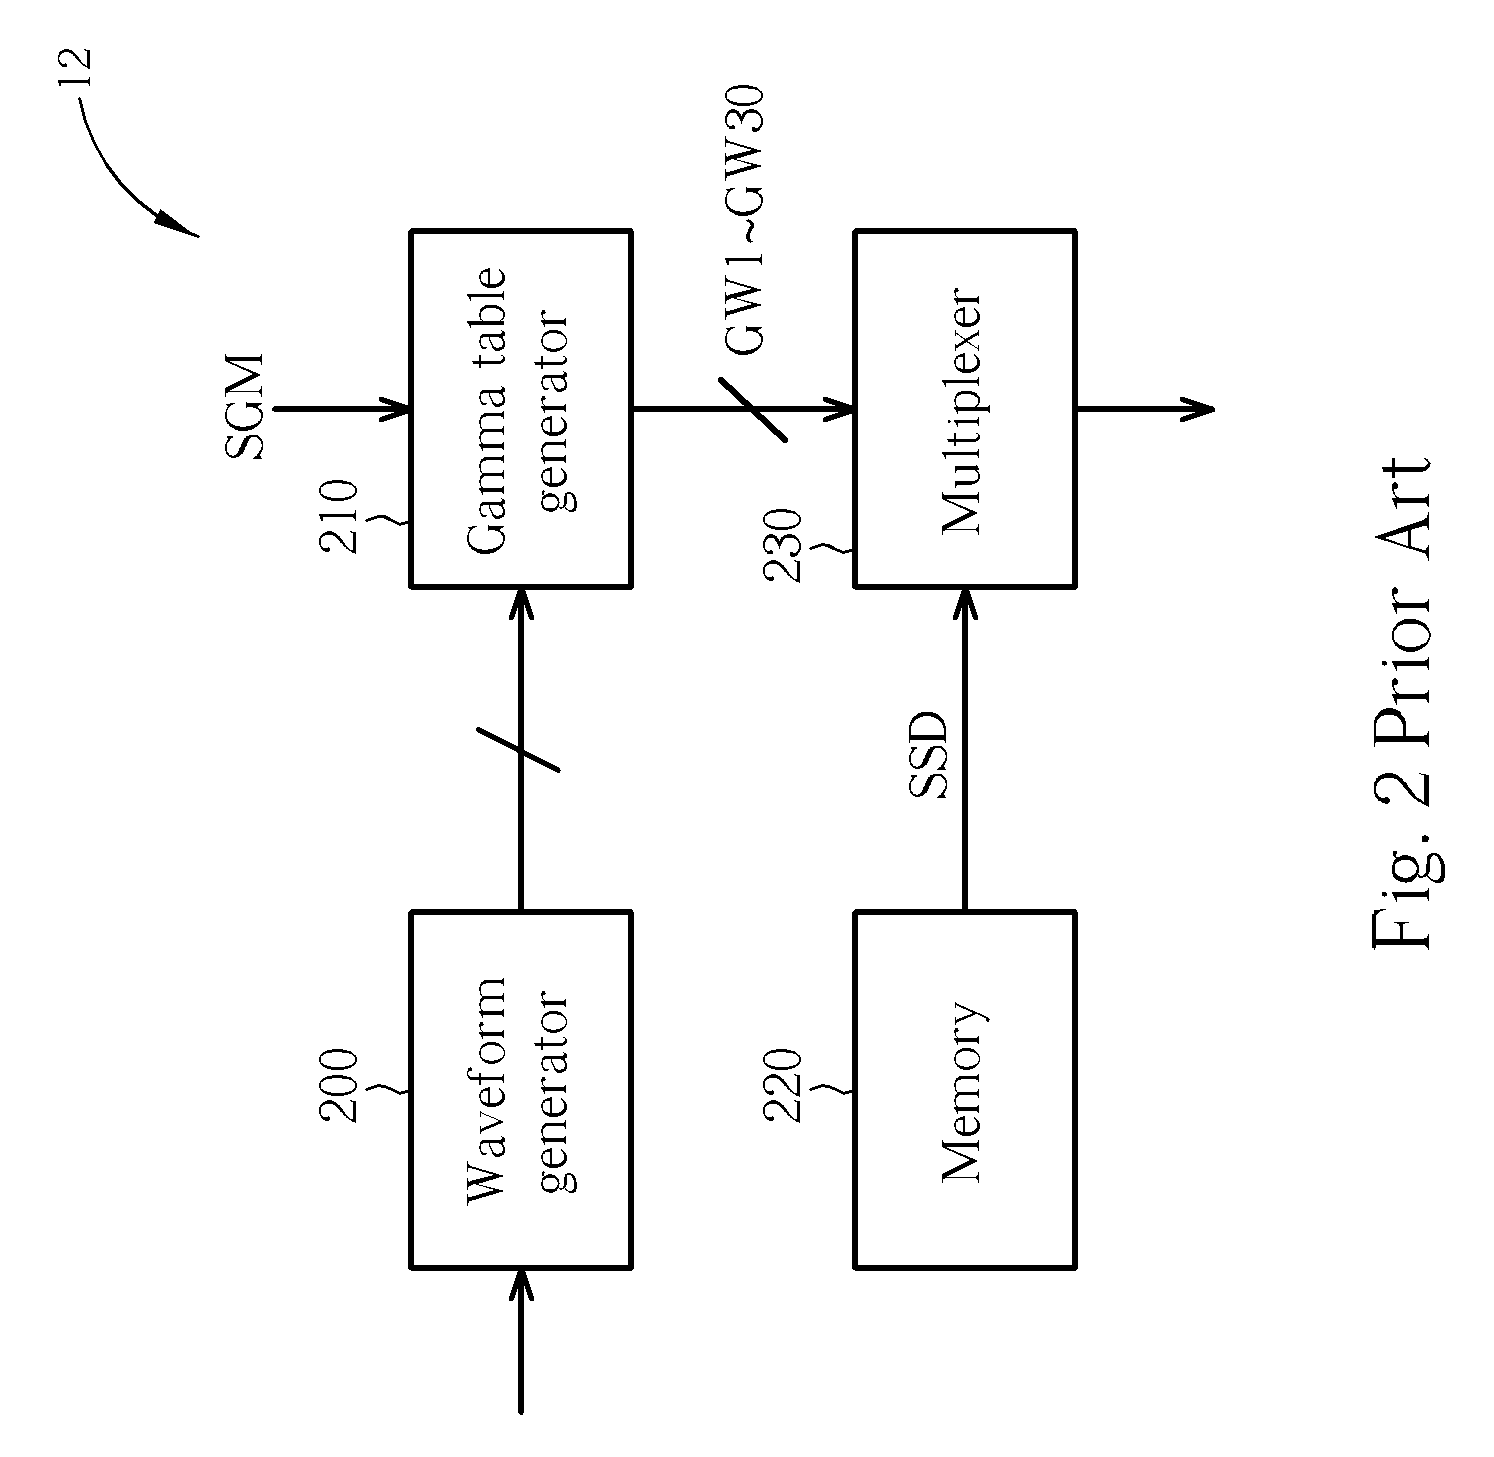 Driving signal generating device and related method for display device